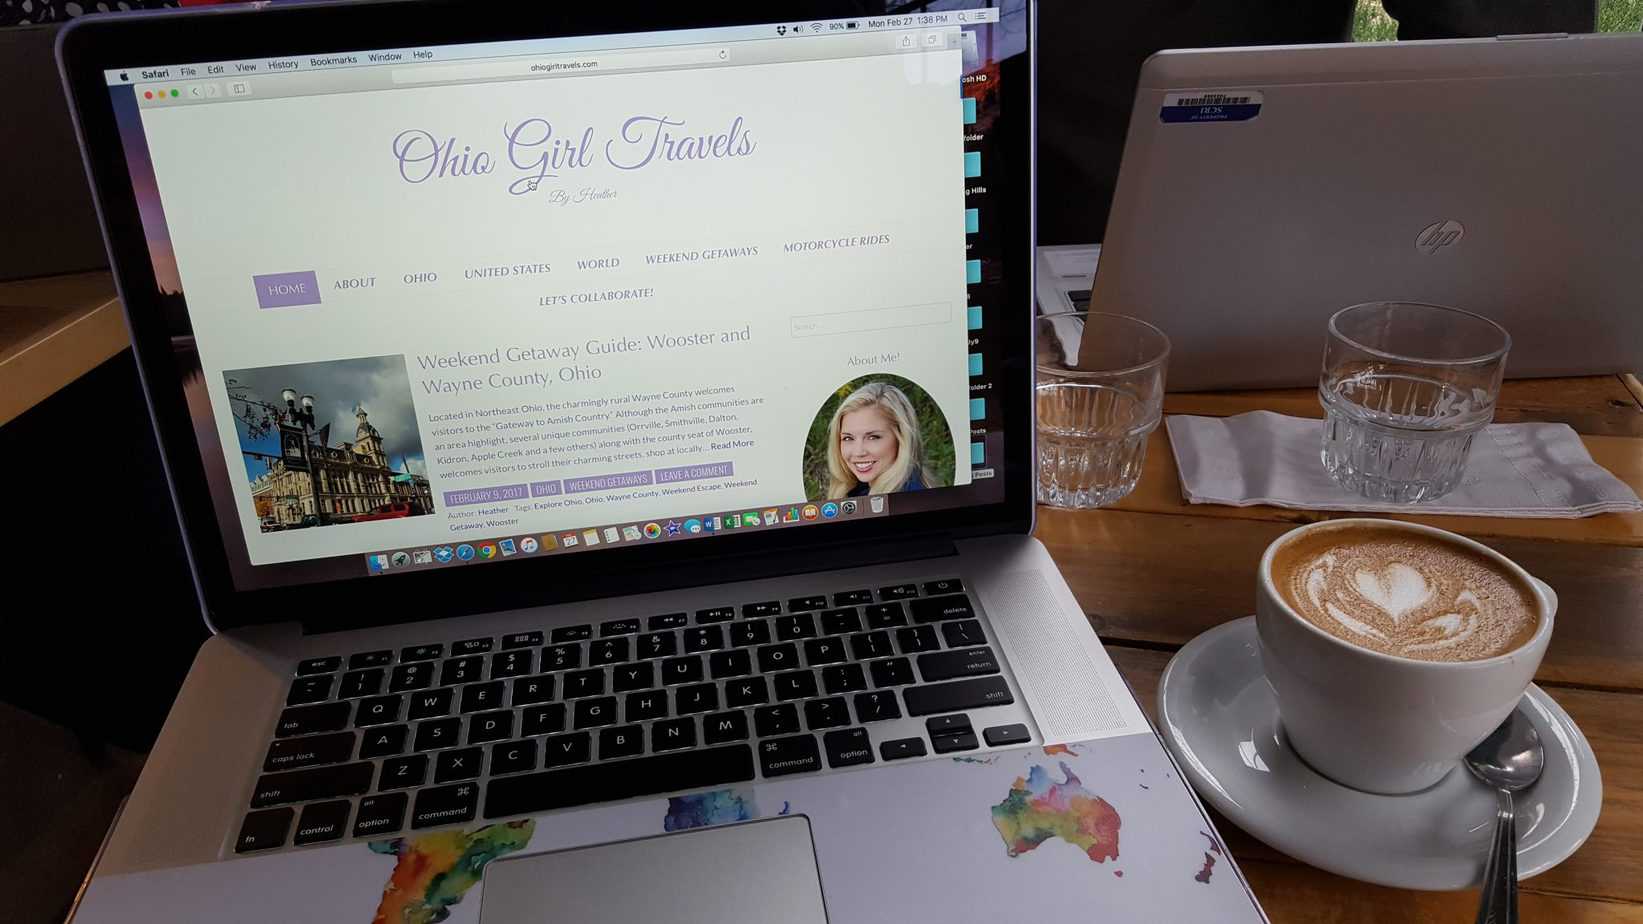 A laptop is open to a website that is called Ohio Girl Travels.